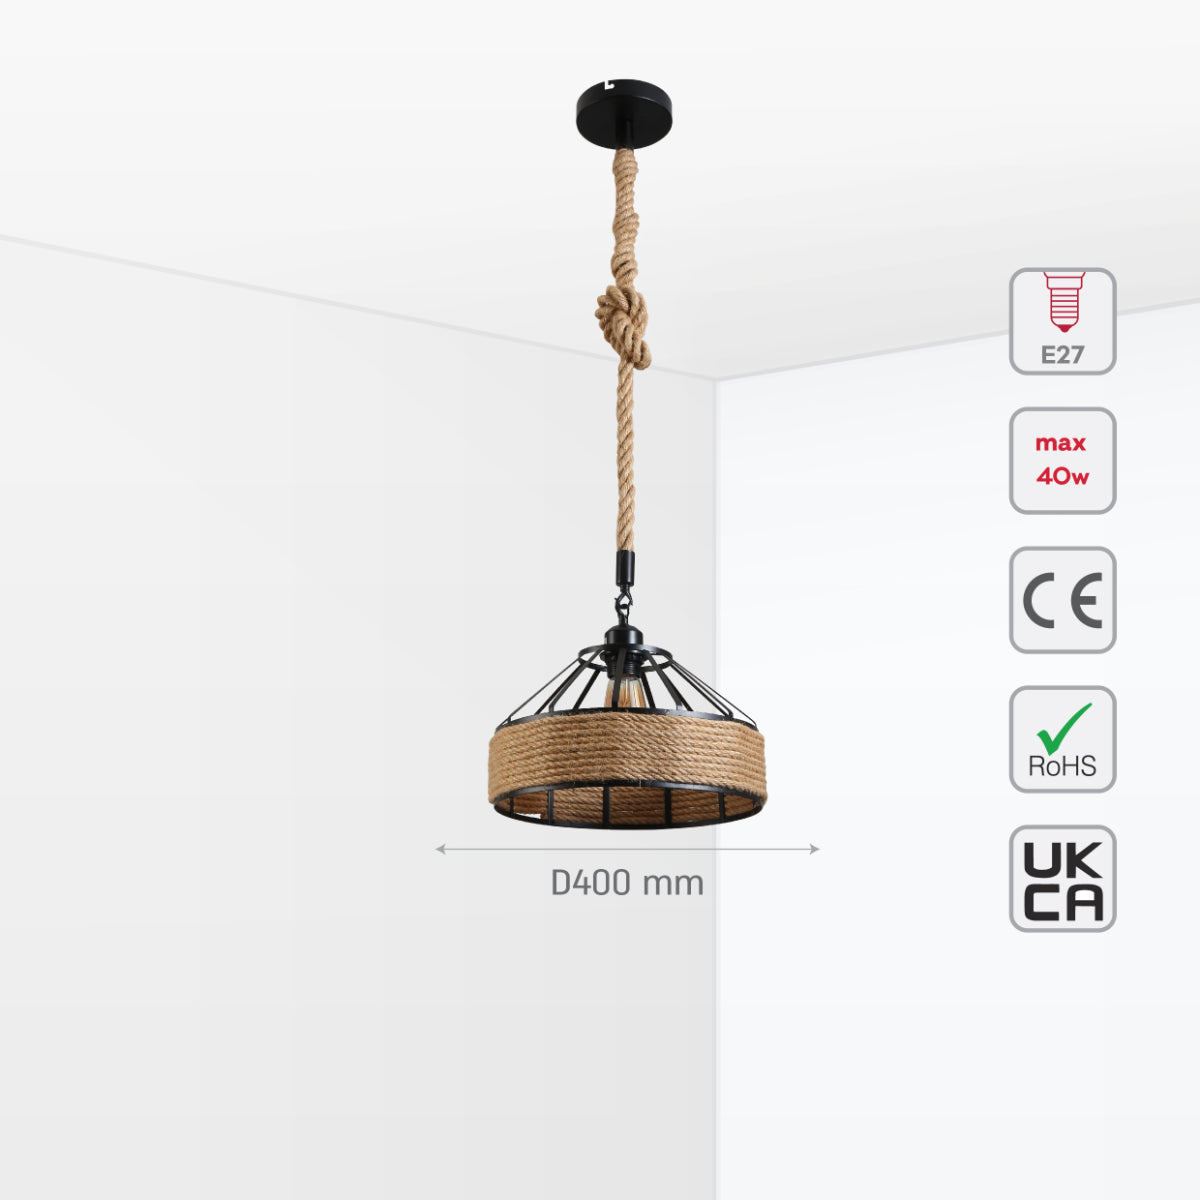 Size and certifications of Black Metal Hemp Rope Cage Pendant Ceiling Light E27 159-18125